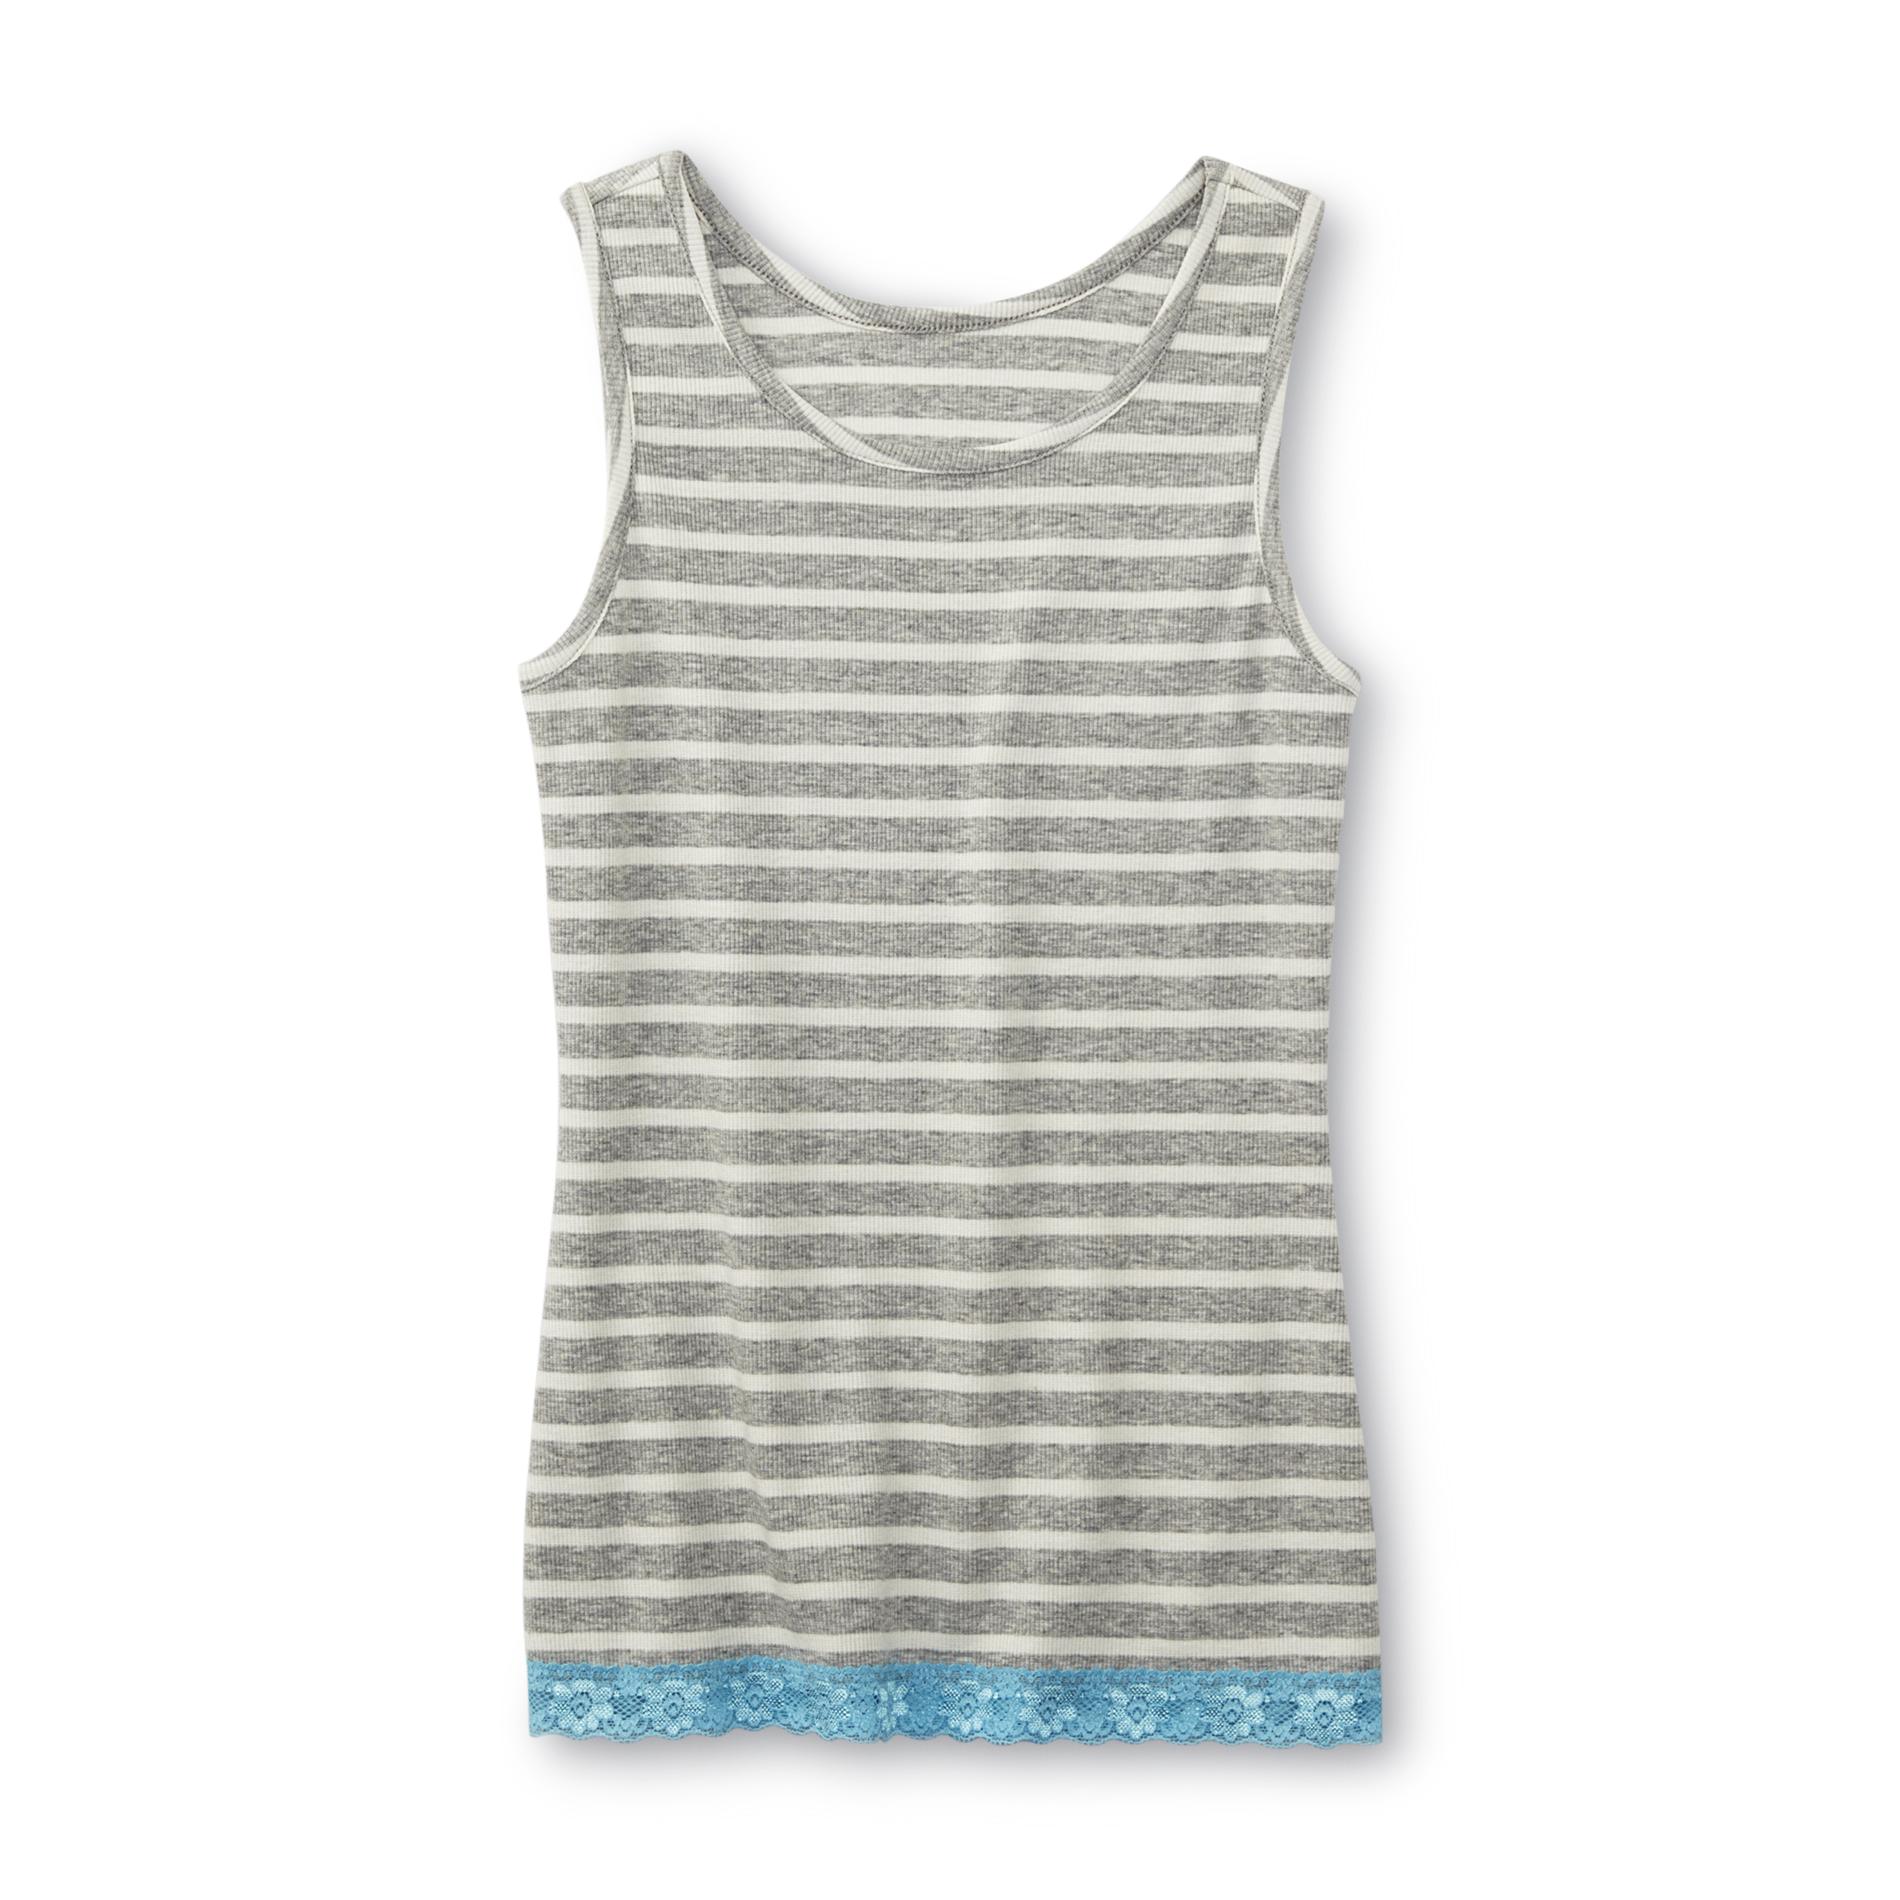 Simply Styled Girl's Tank Top - Striped